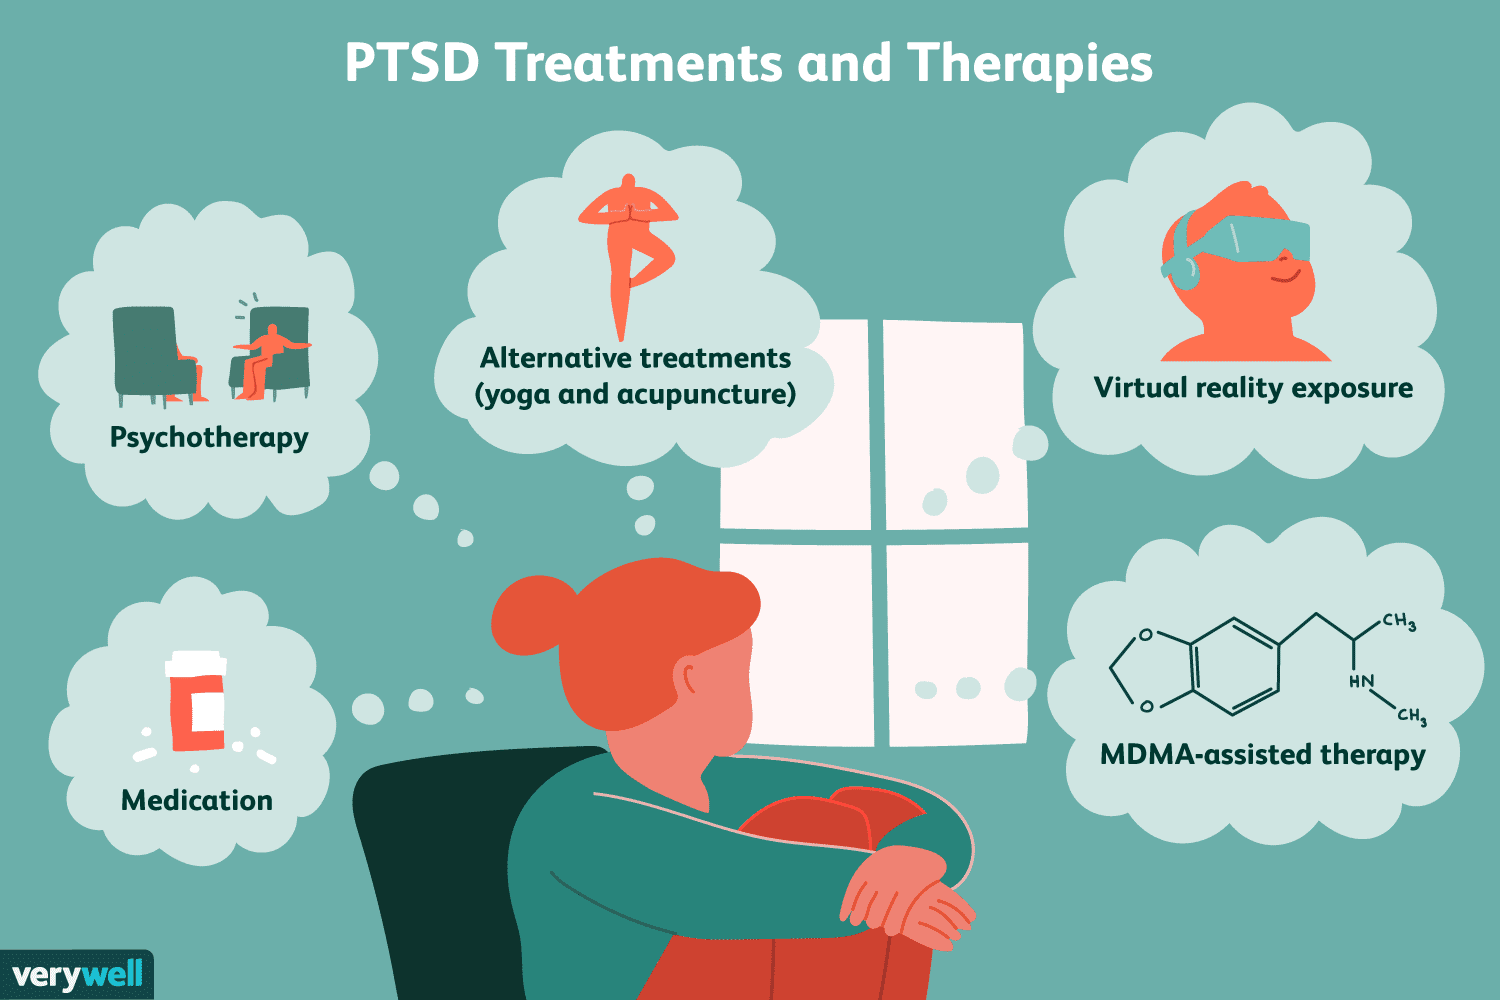 How PTSD Is Treated: Is There a Cure?